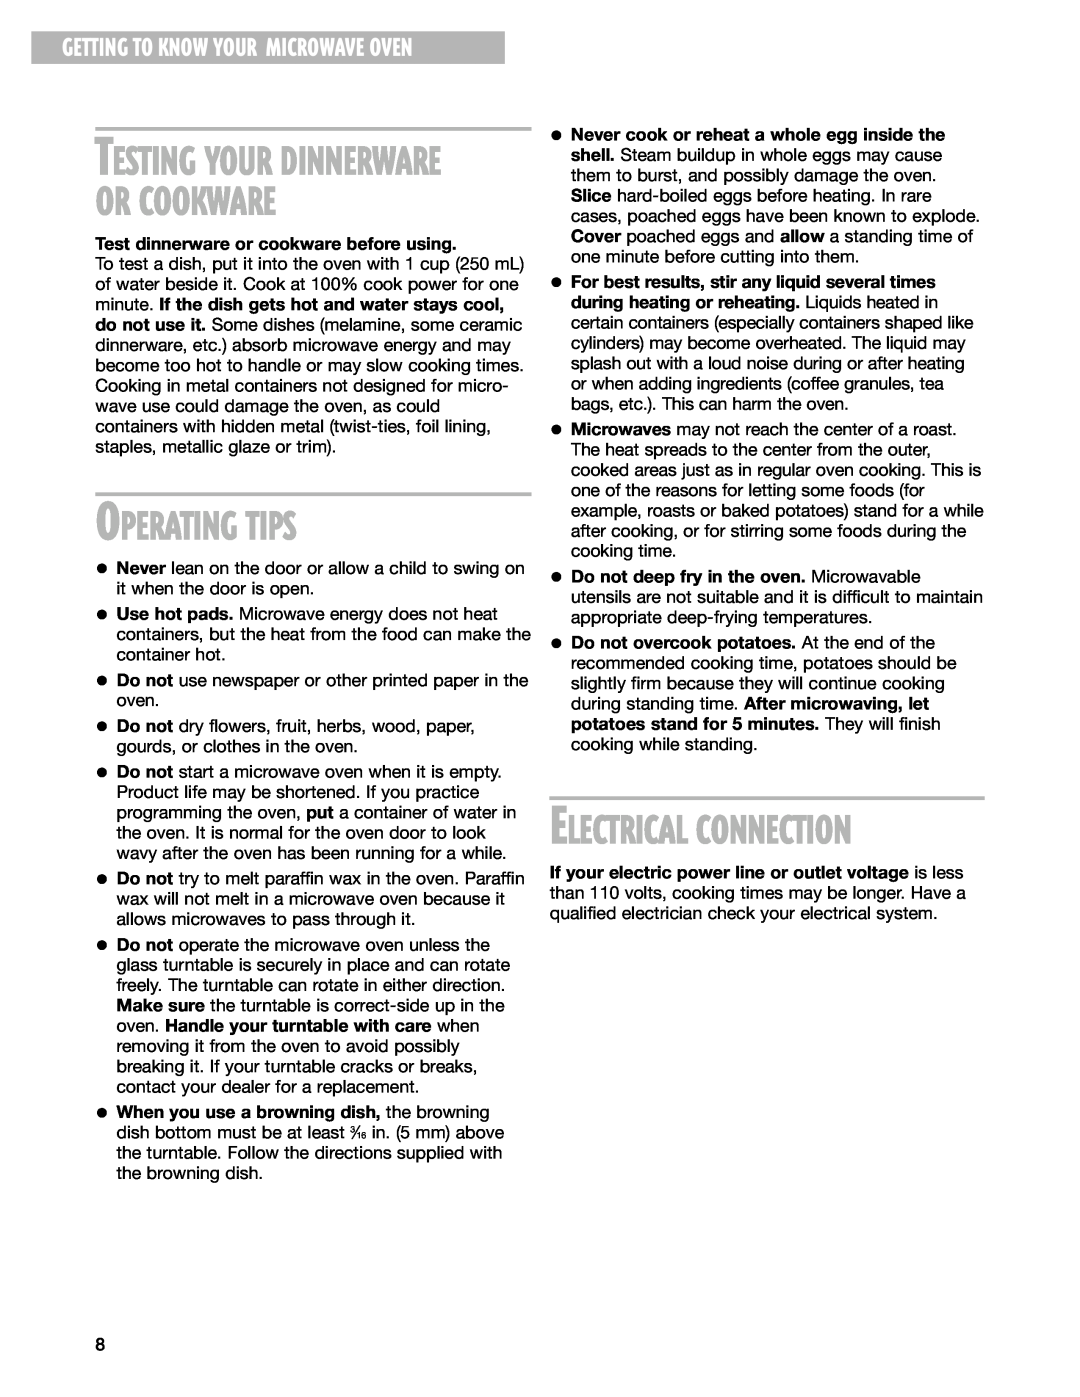 Whirlpool GT4185SK installation instructions Or Cookware, Operating Tips, Electrical Connection, Testing Your Dinnerware 